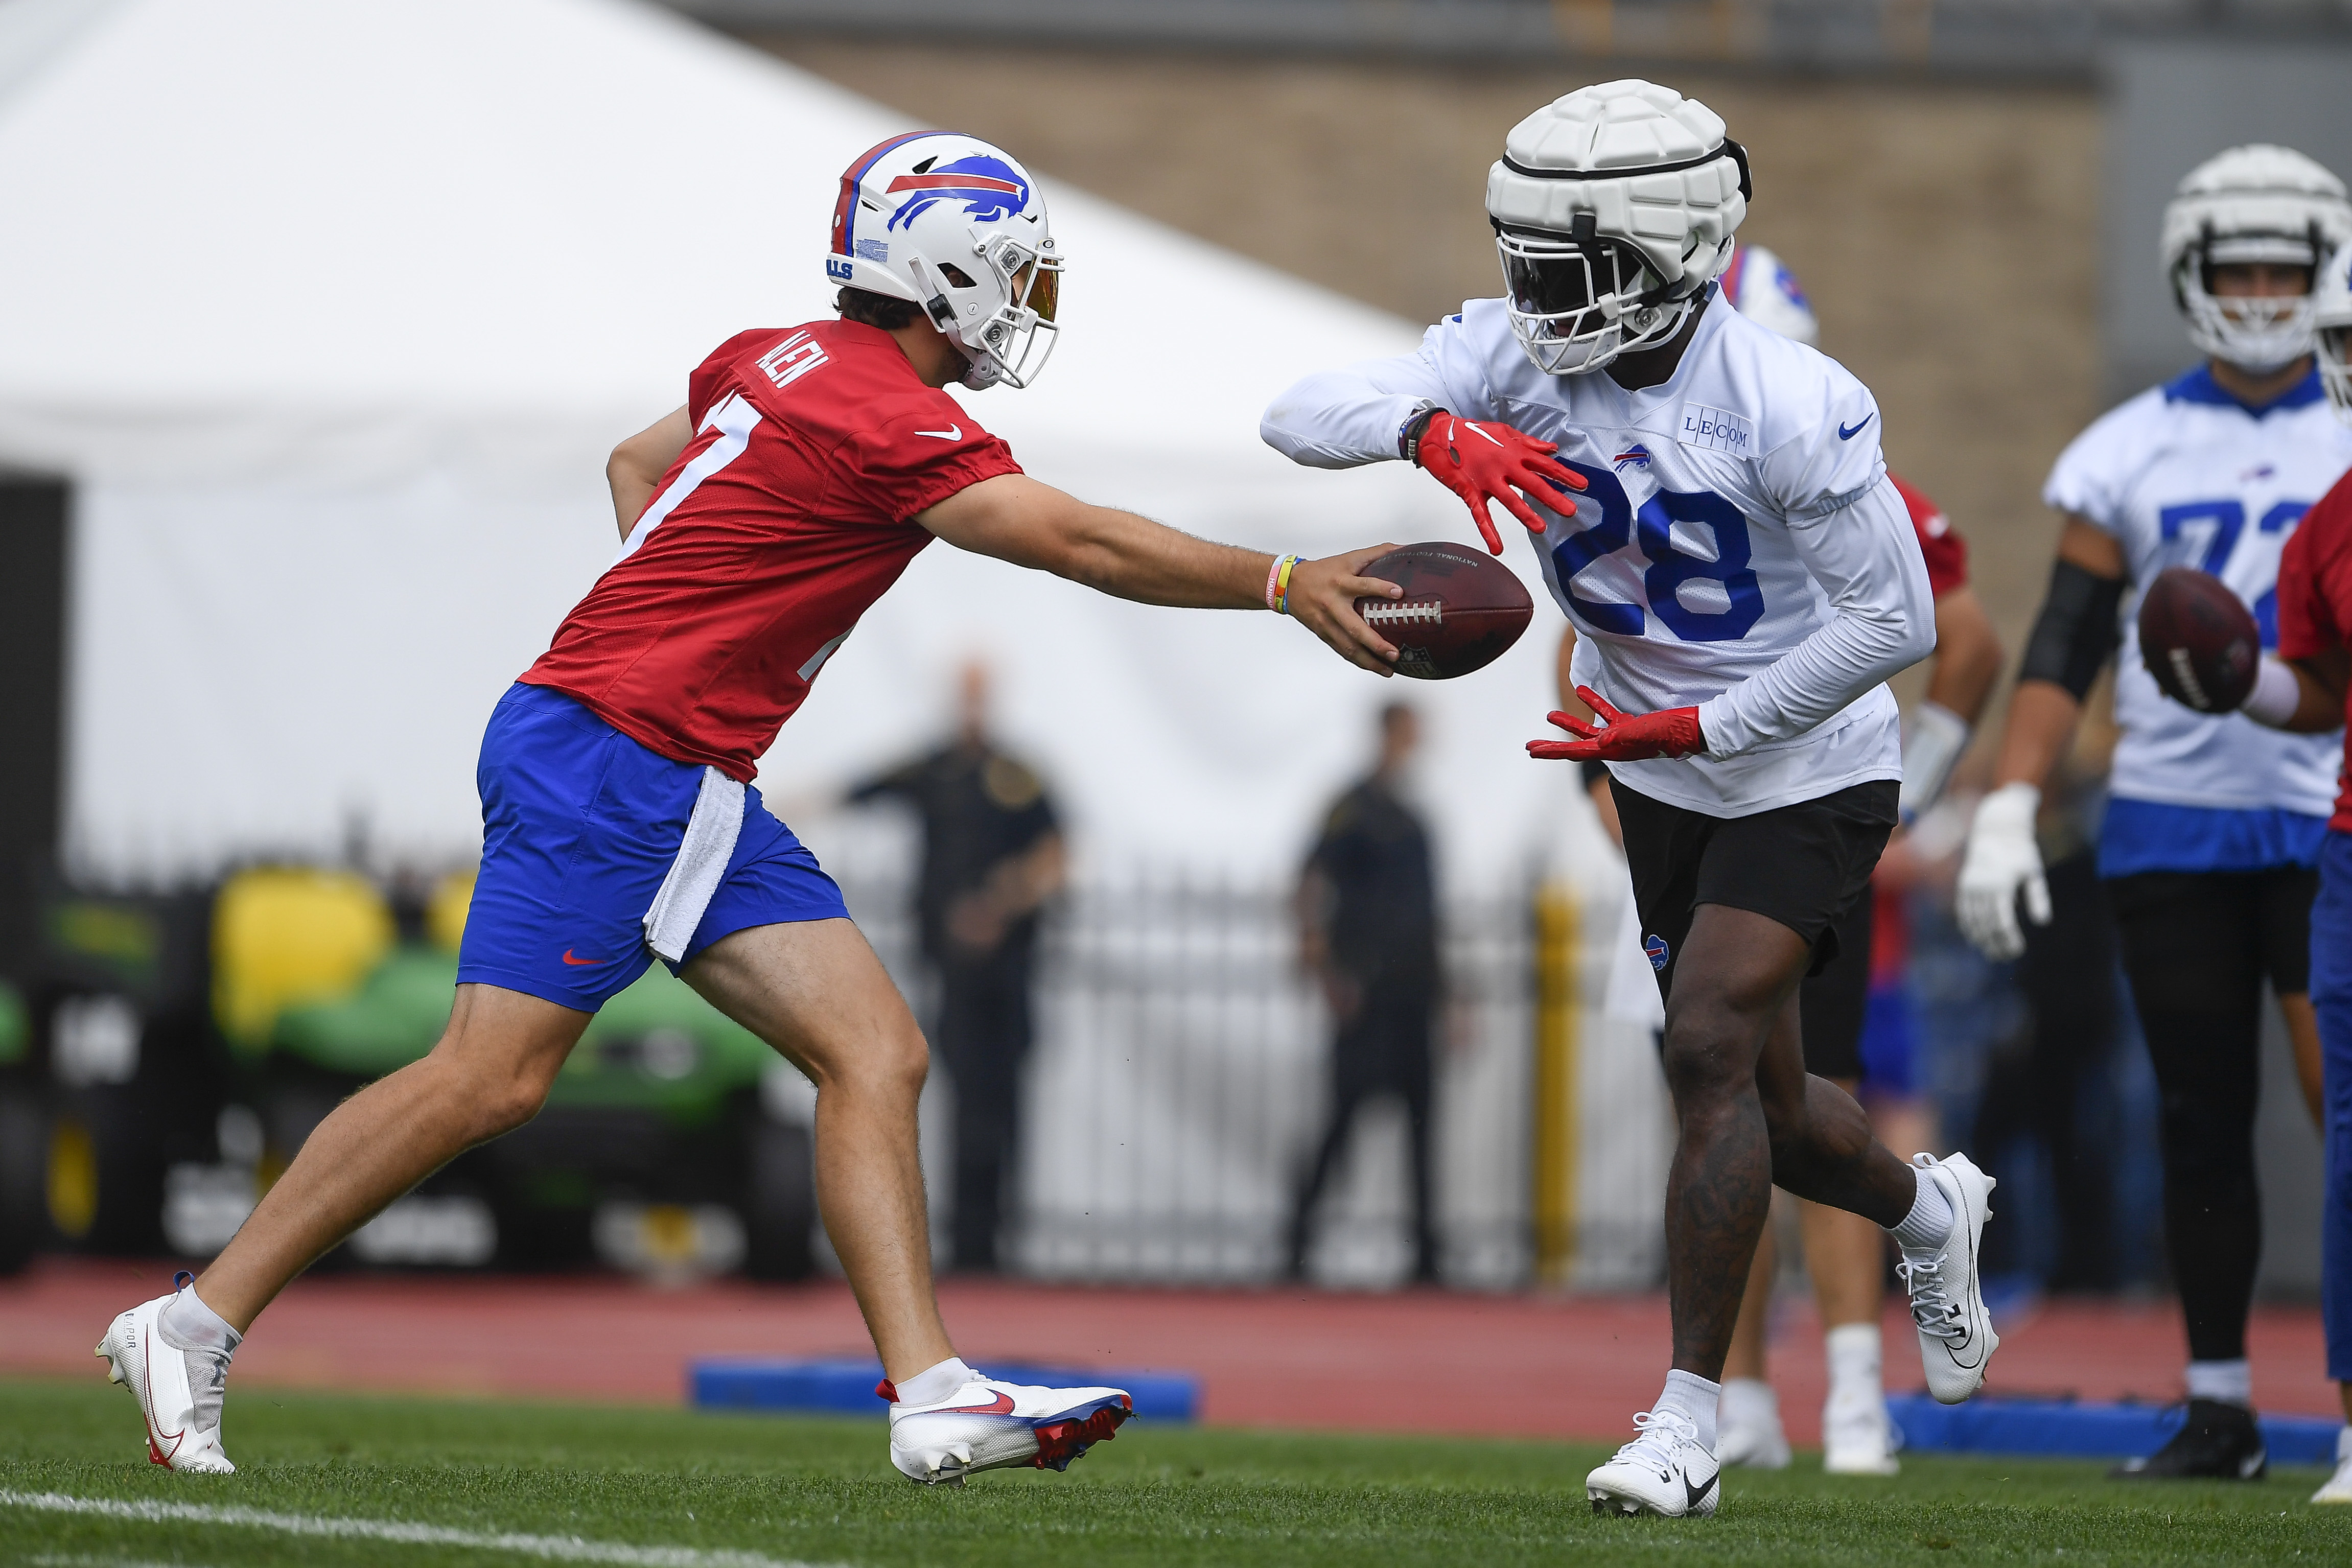 2023 NFL preseason: How to watch the Colts vs. Bills game